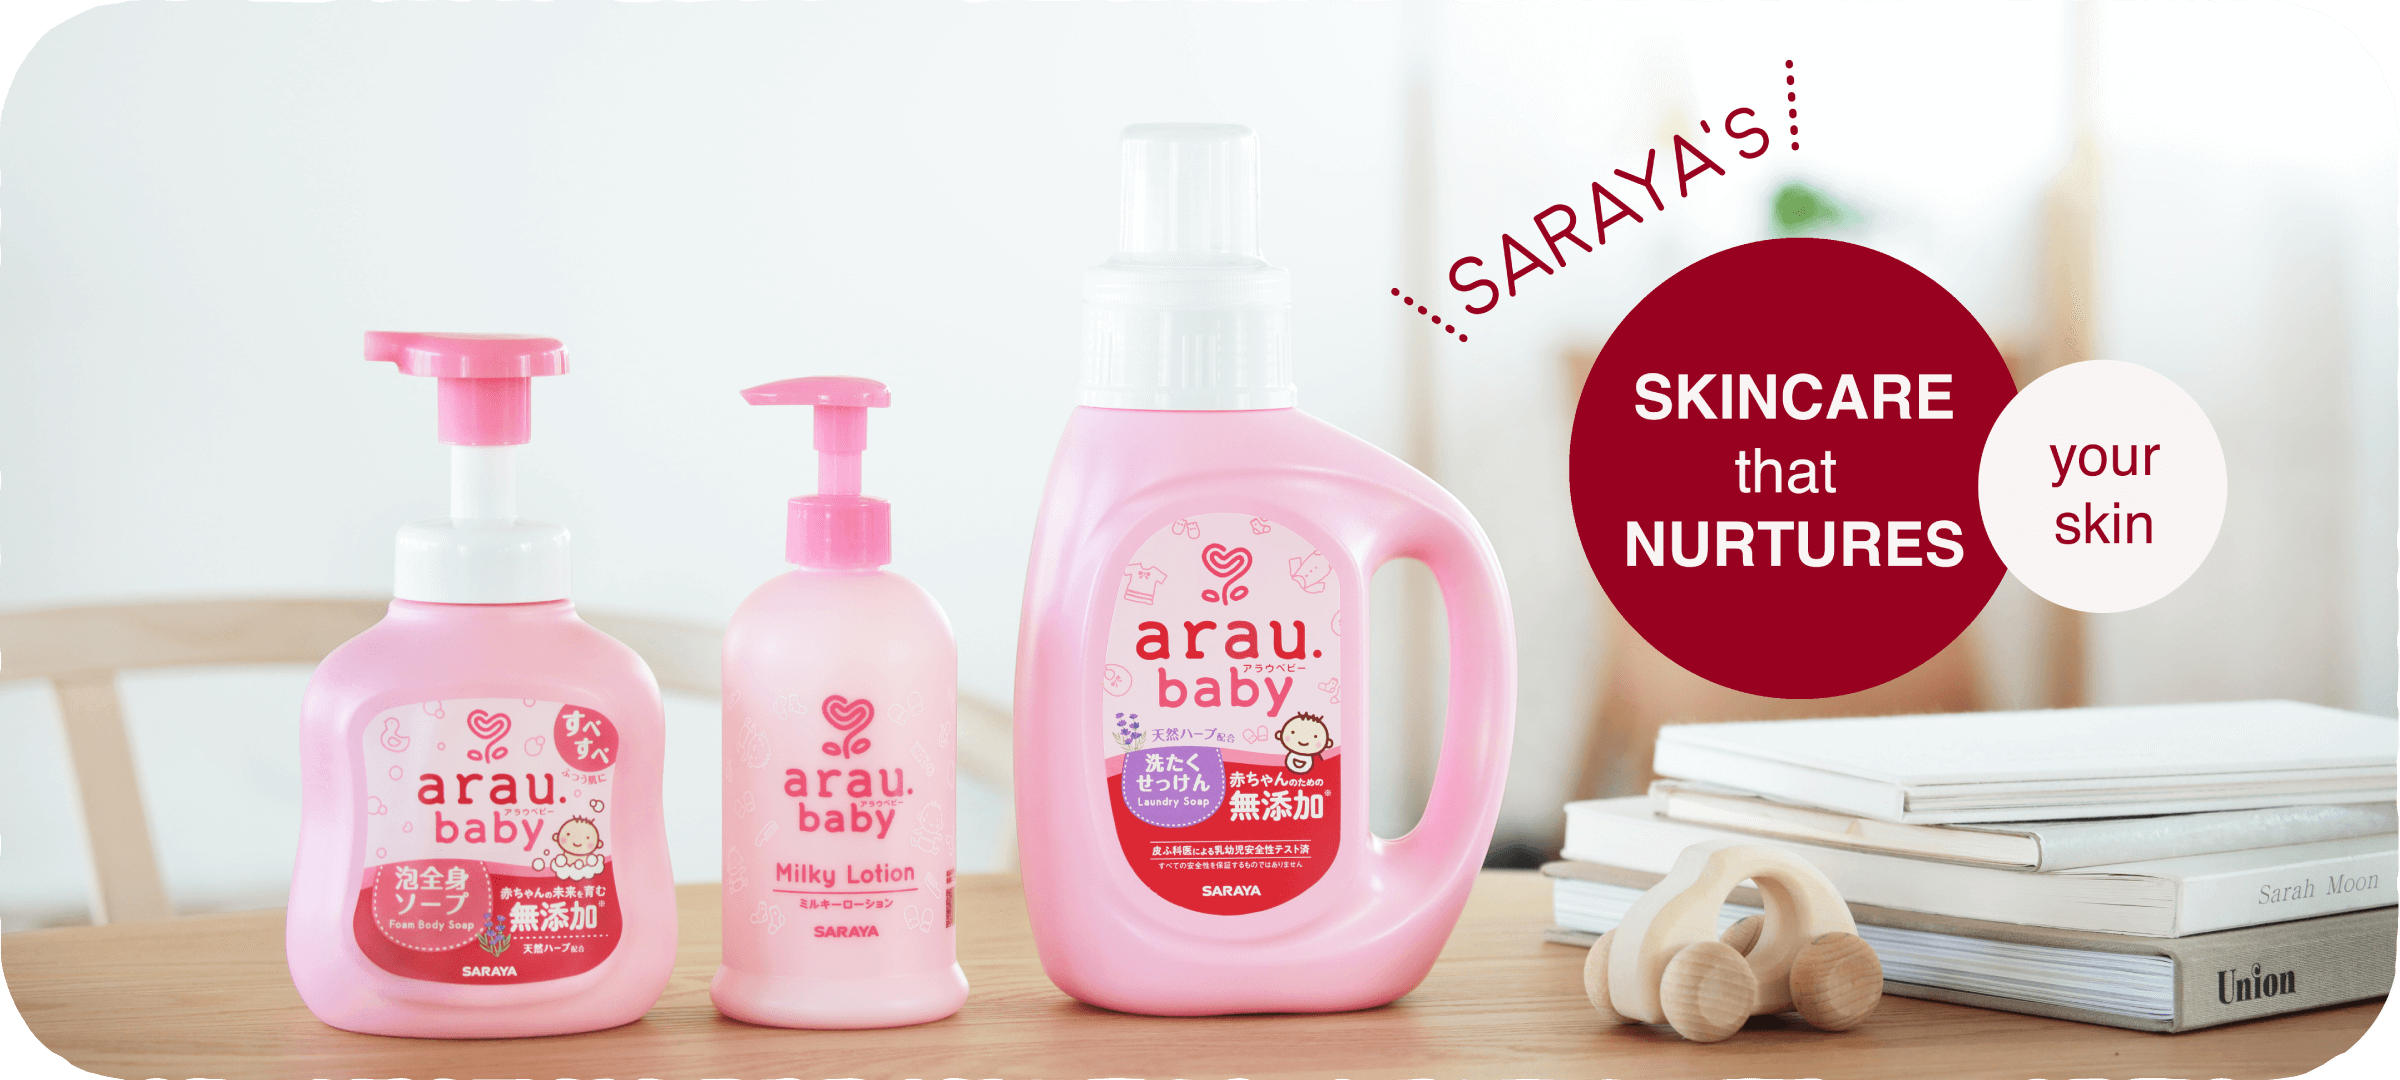 arau.baby is a skin care product that nurtures skin